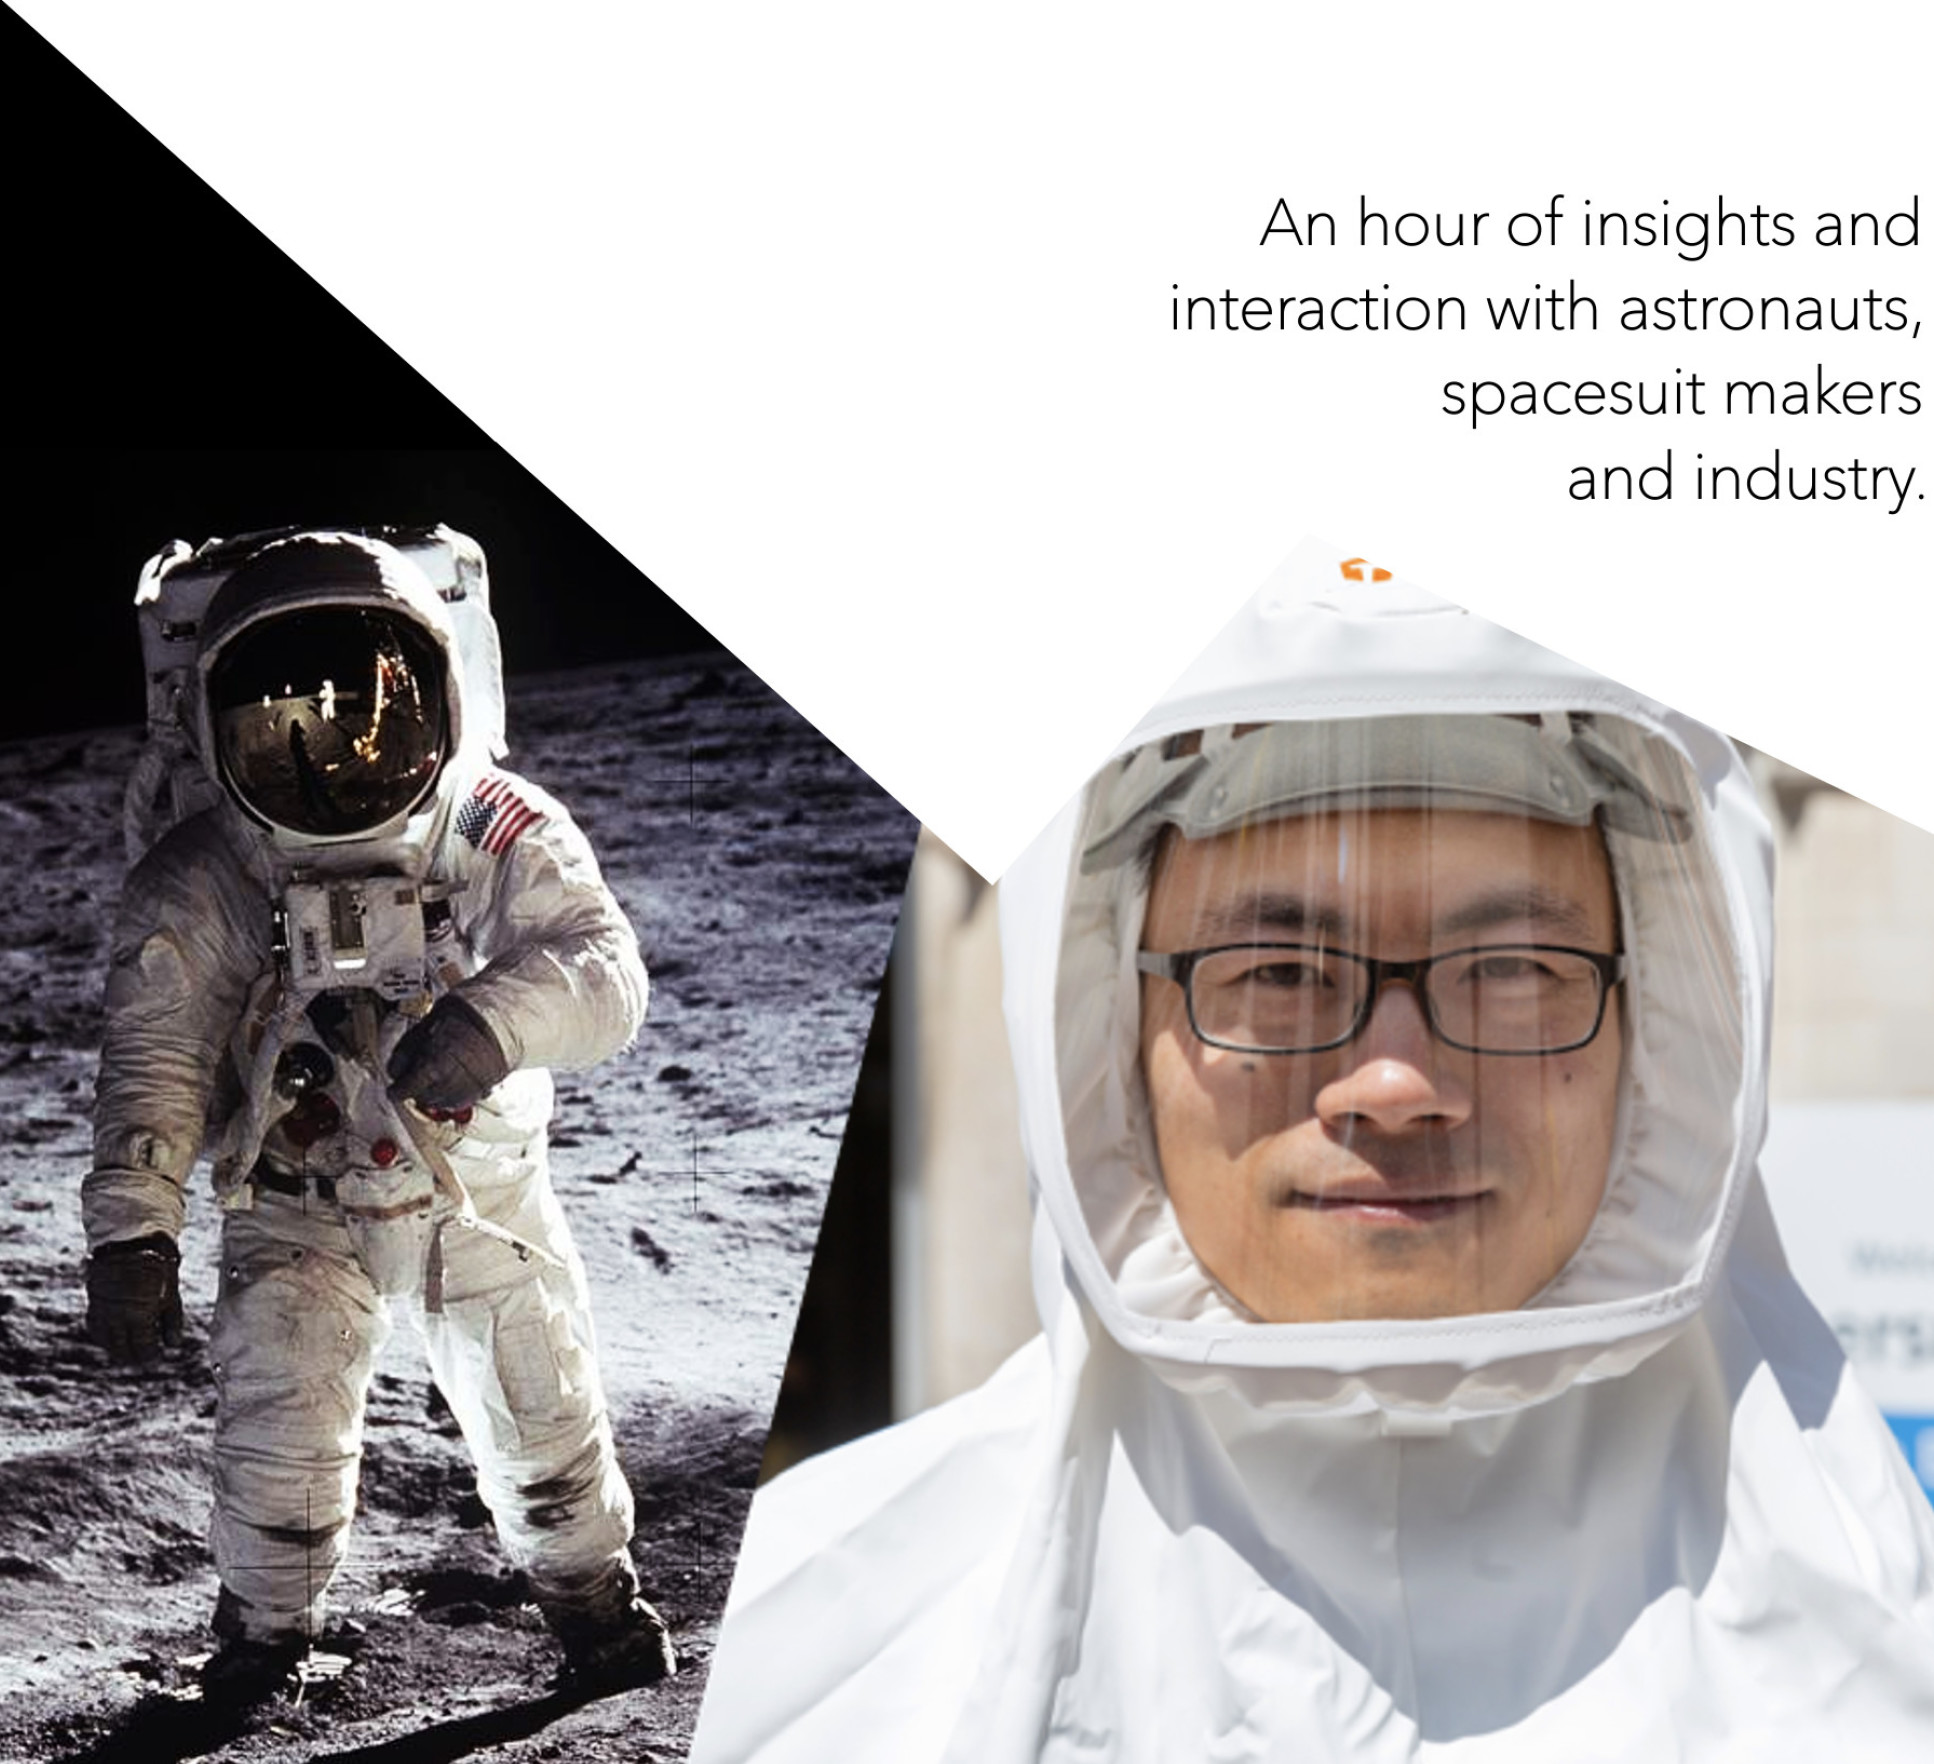 An hour of insights and interaction with astronauts, spacesuit makers and industry